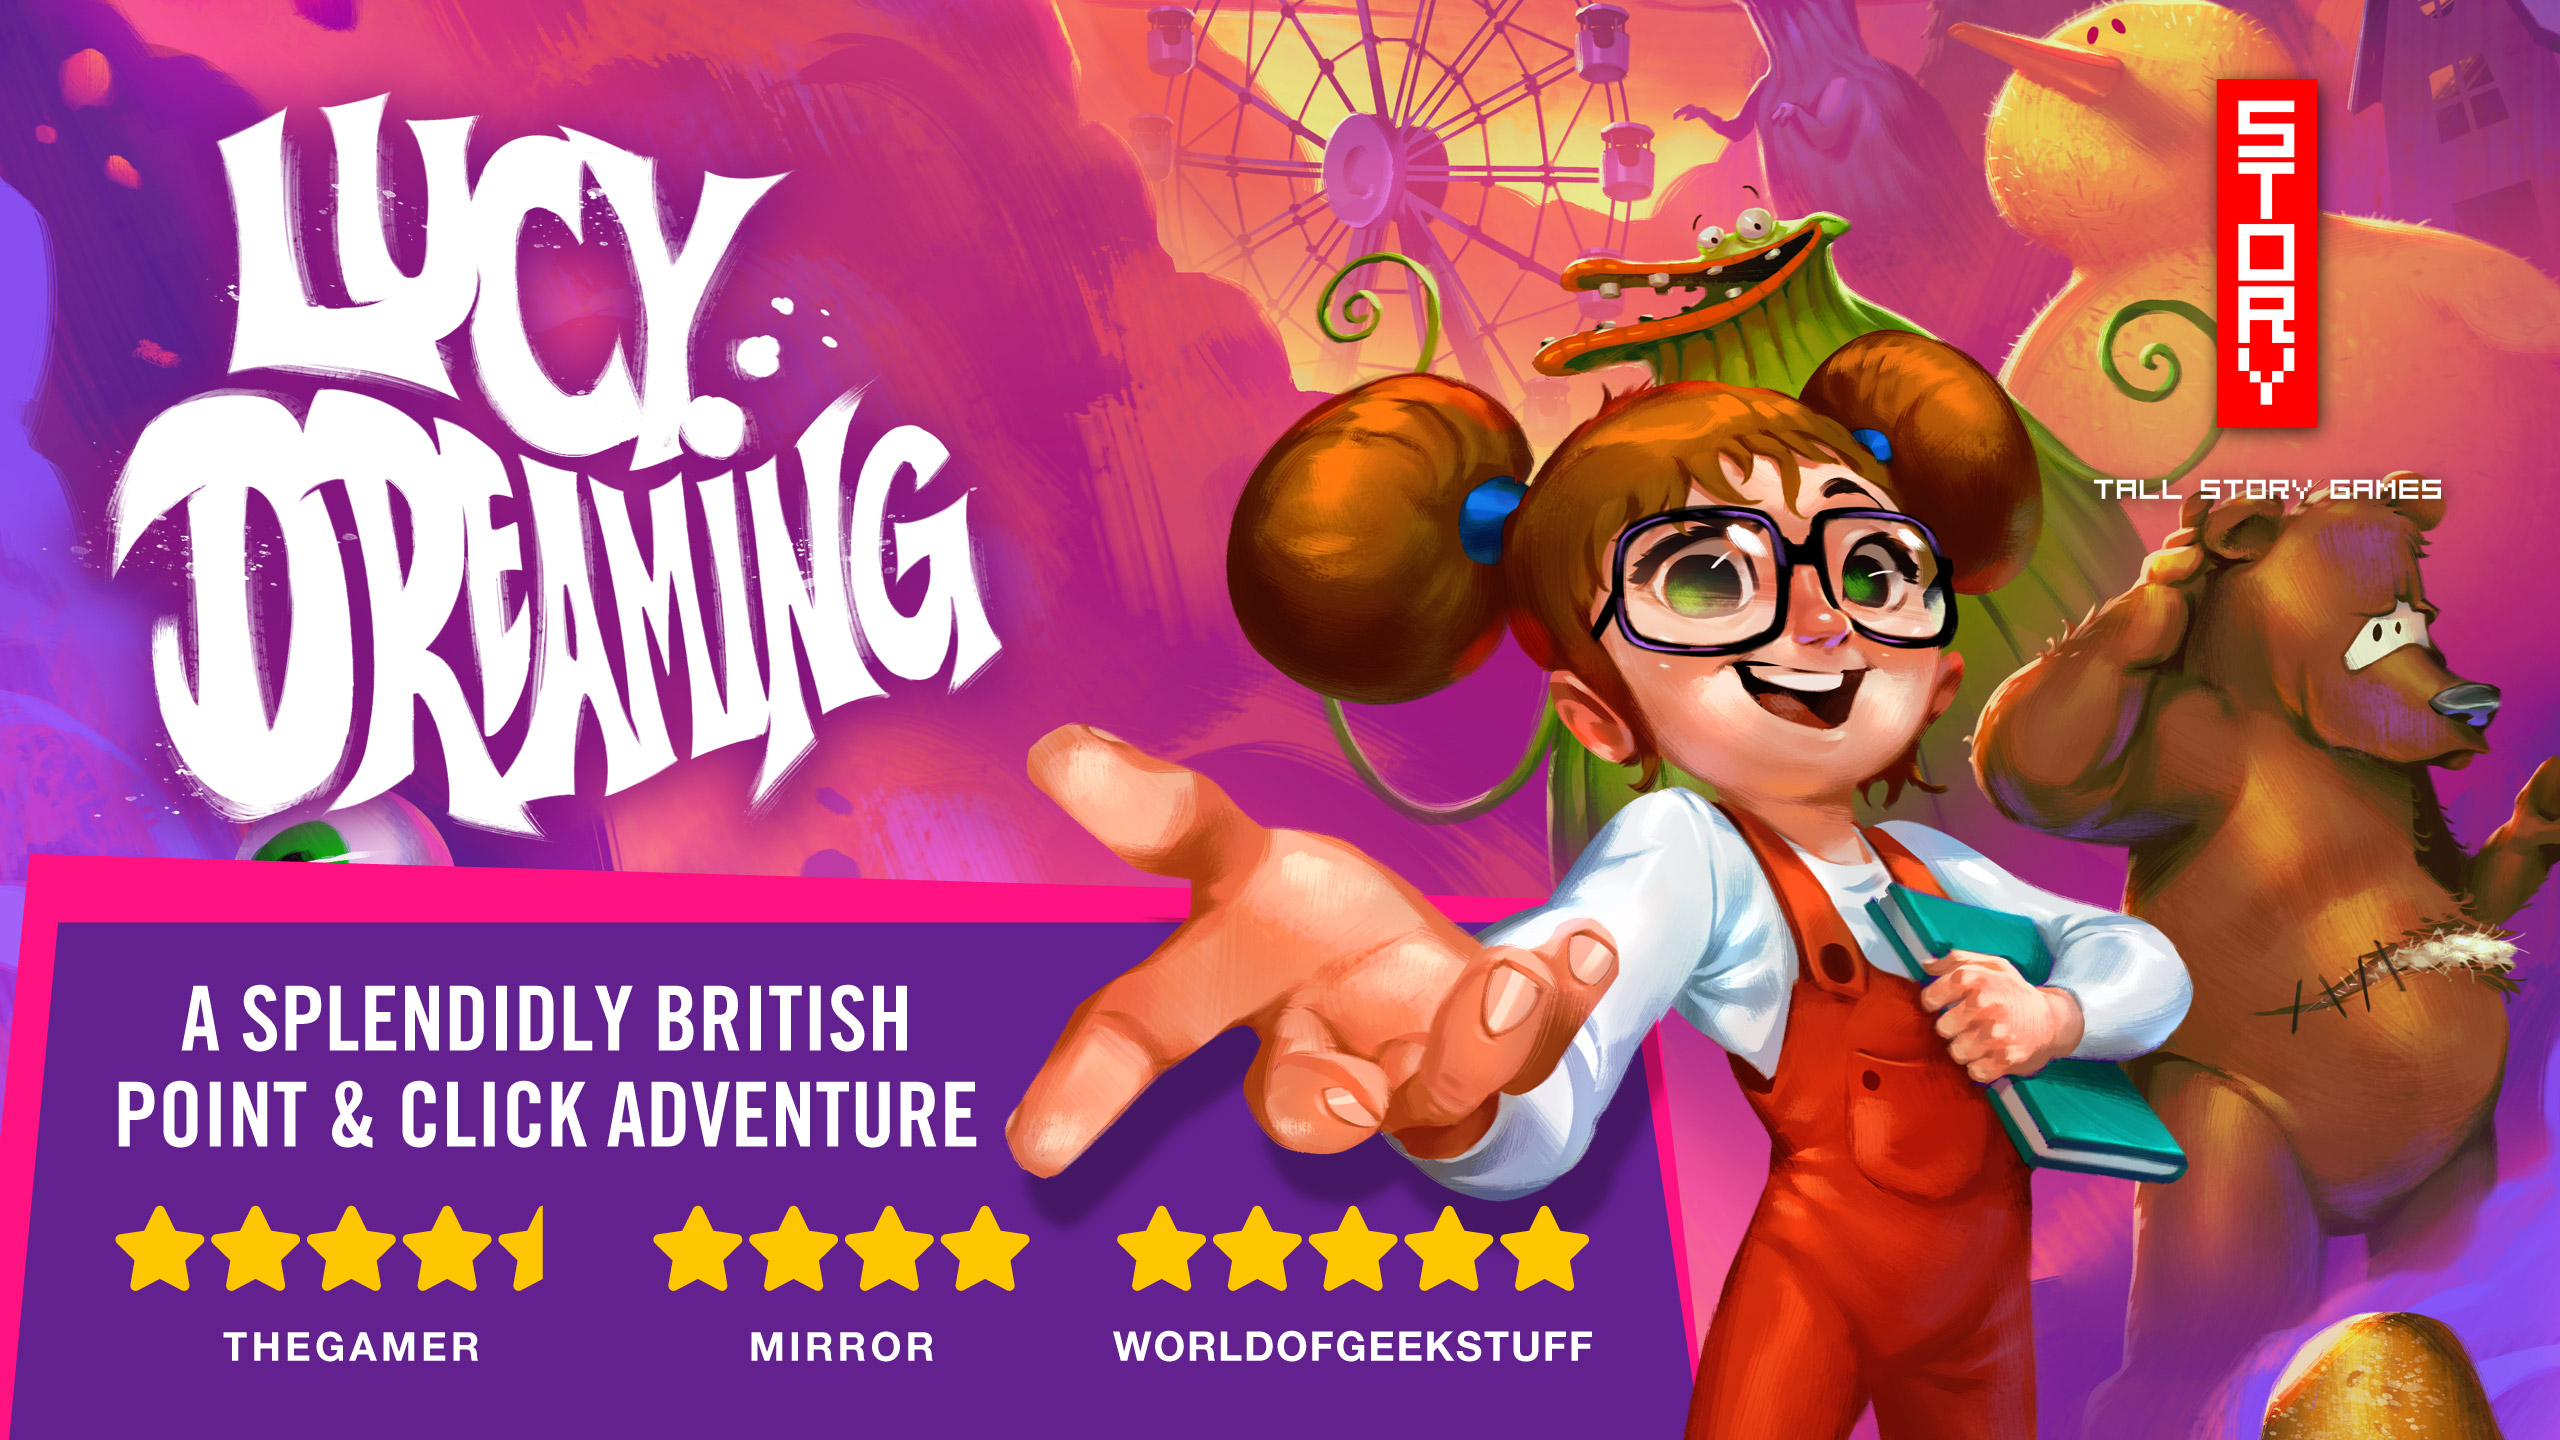 Tall Story Games - Lucy Dreaming